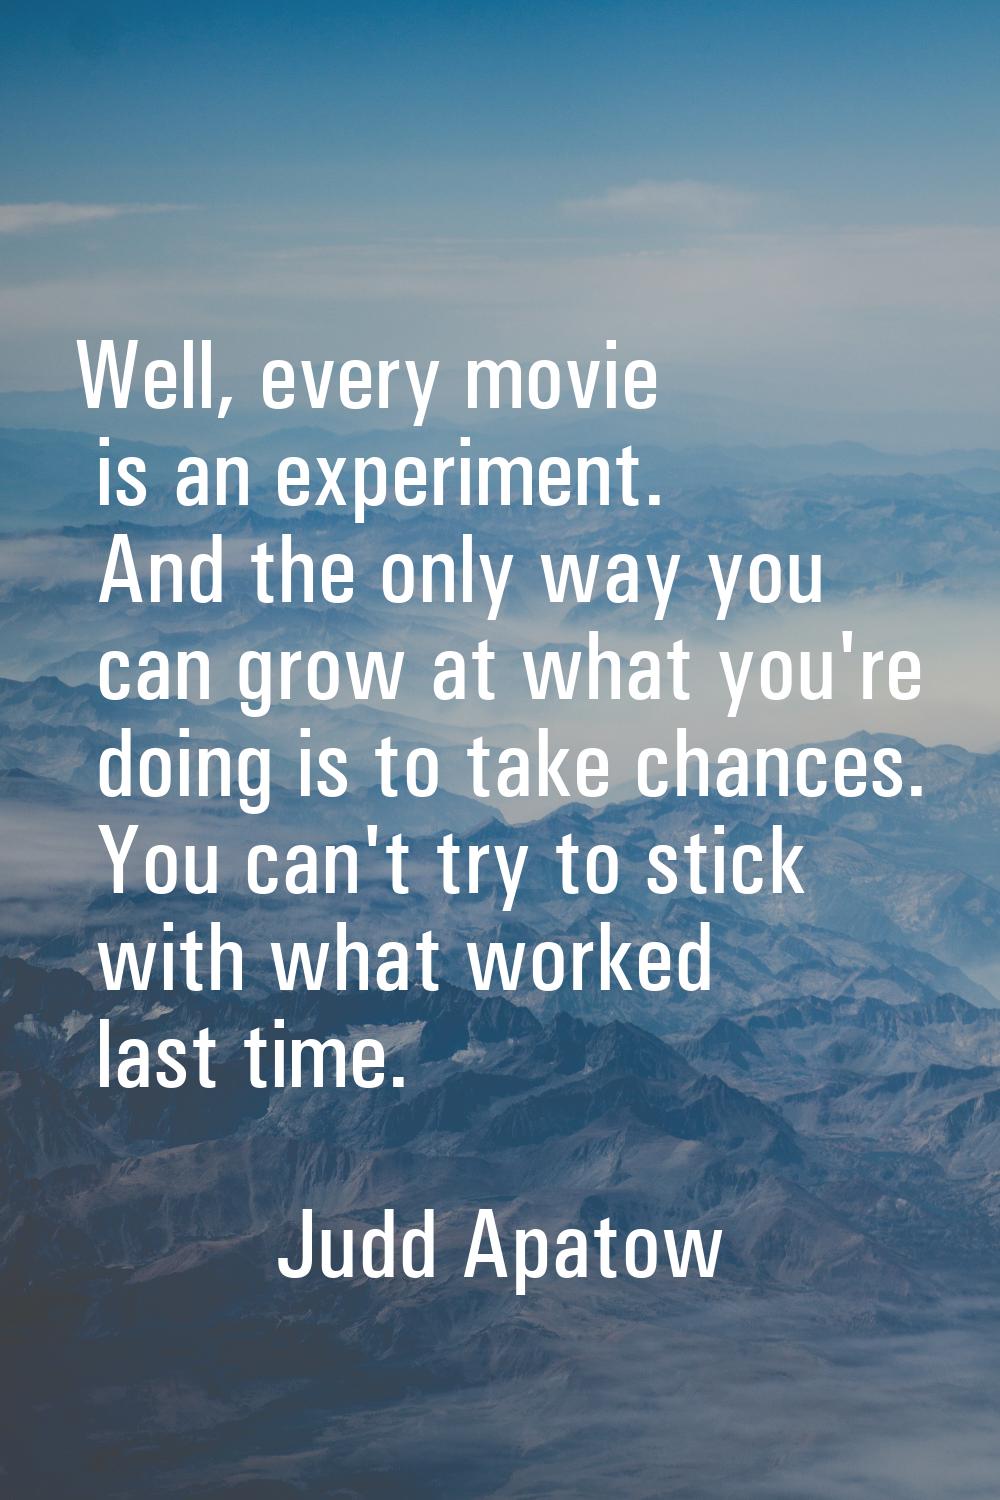 Well, every movie is an experiment. And the only way you can grow at what you're doing is to take c